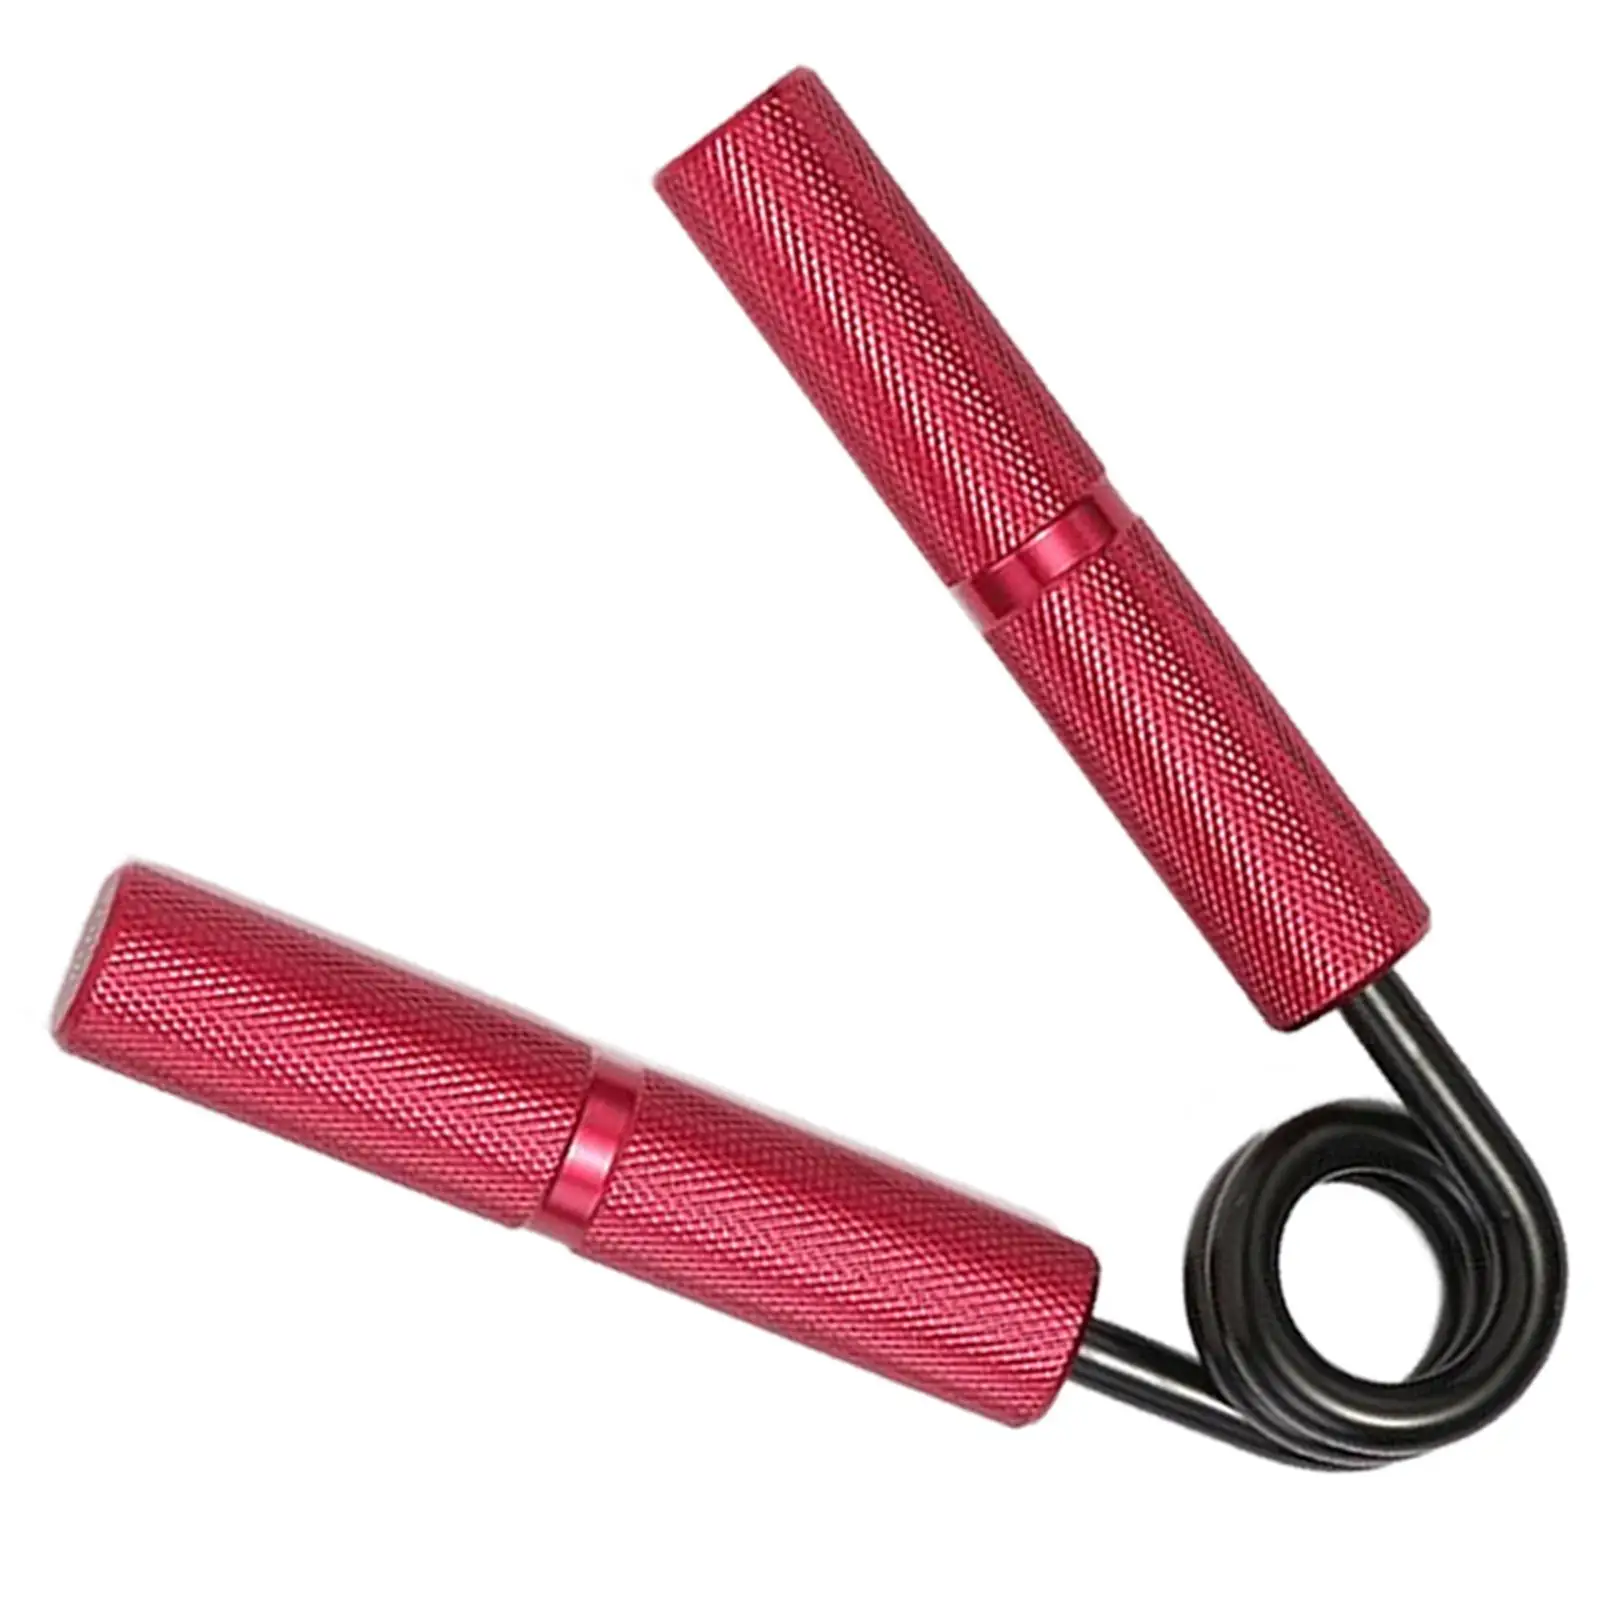 Hand Grip Strengthener 100lbs-350lbs Unisex Stretchy   Device Fitness